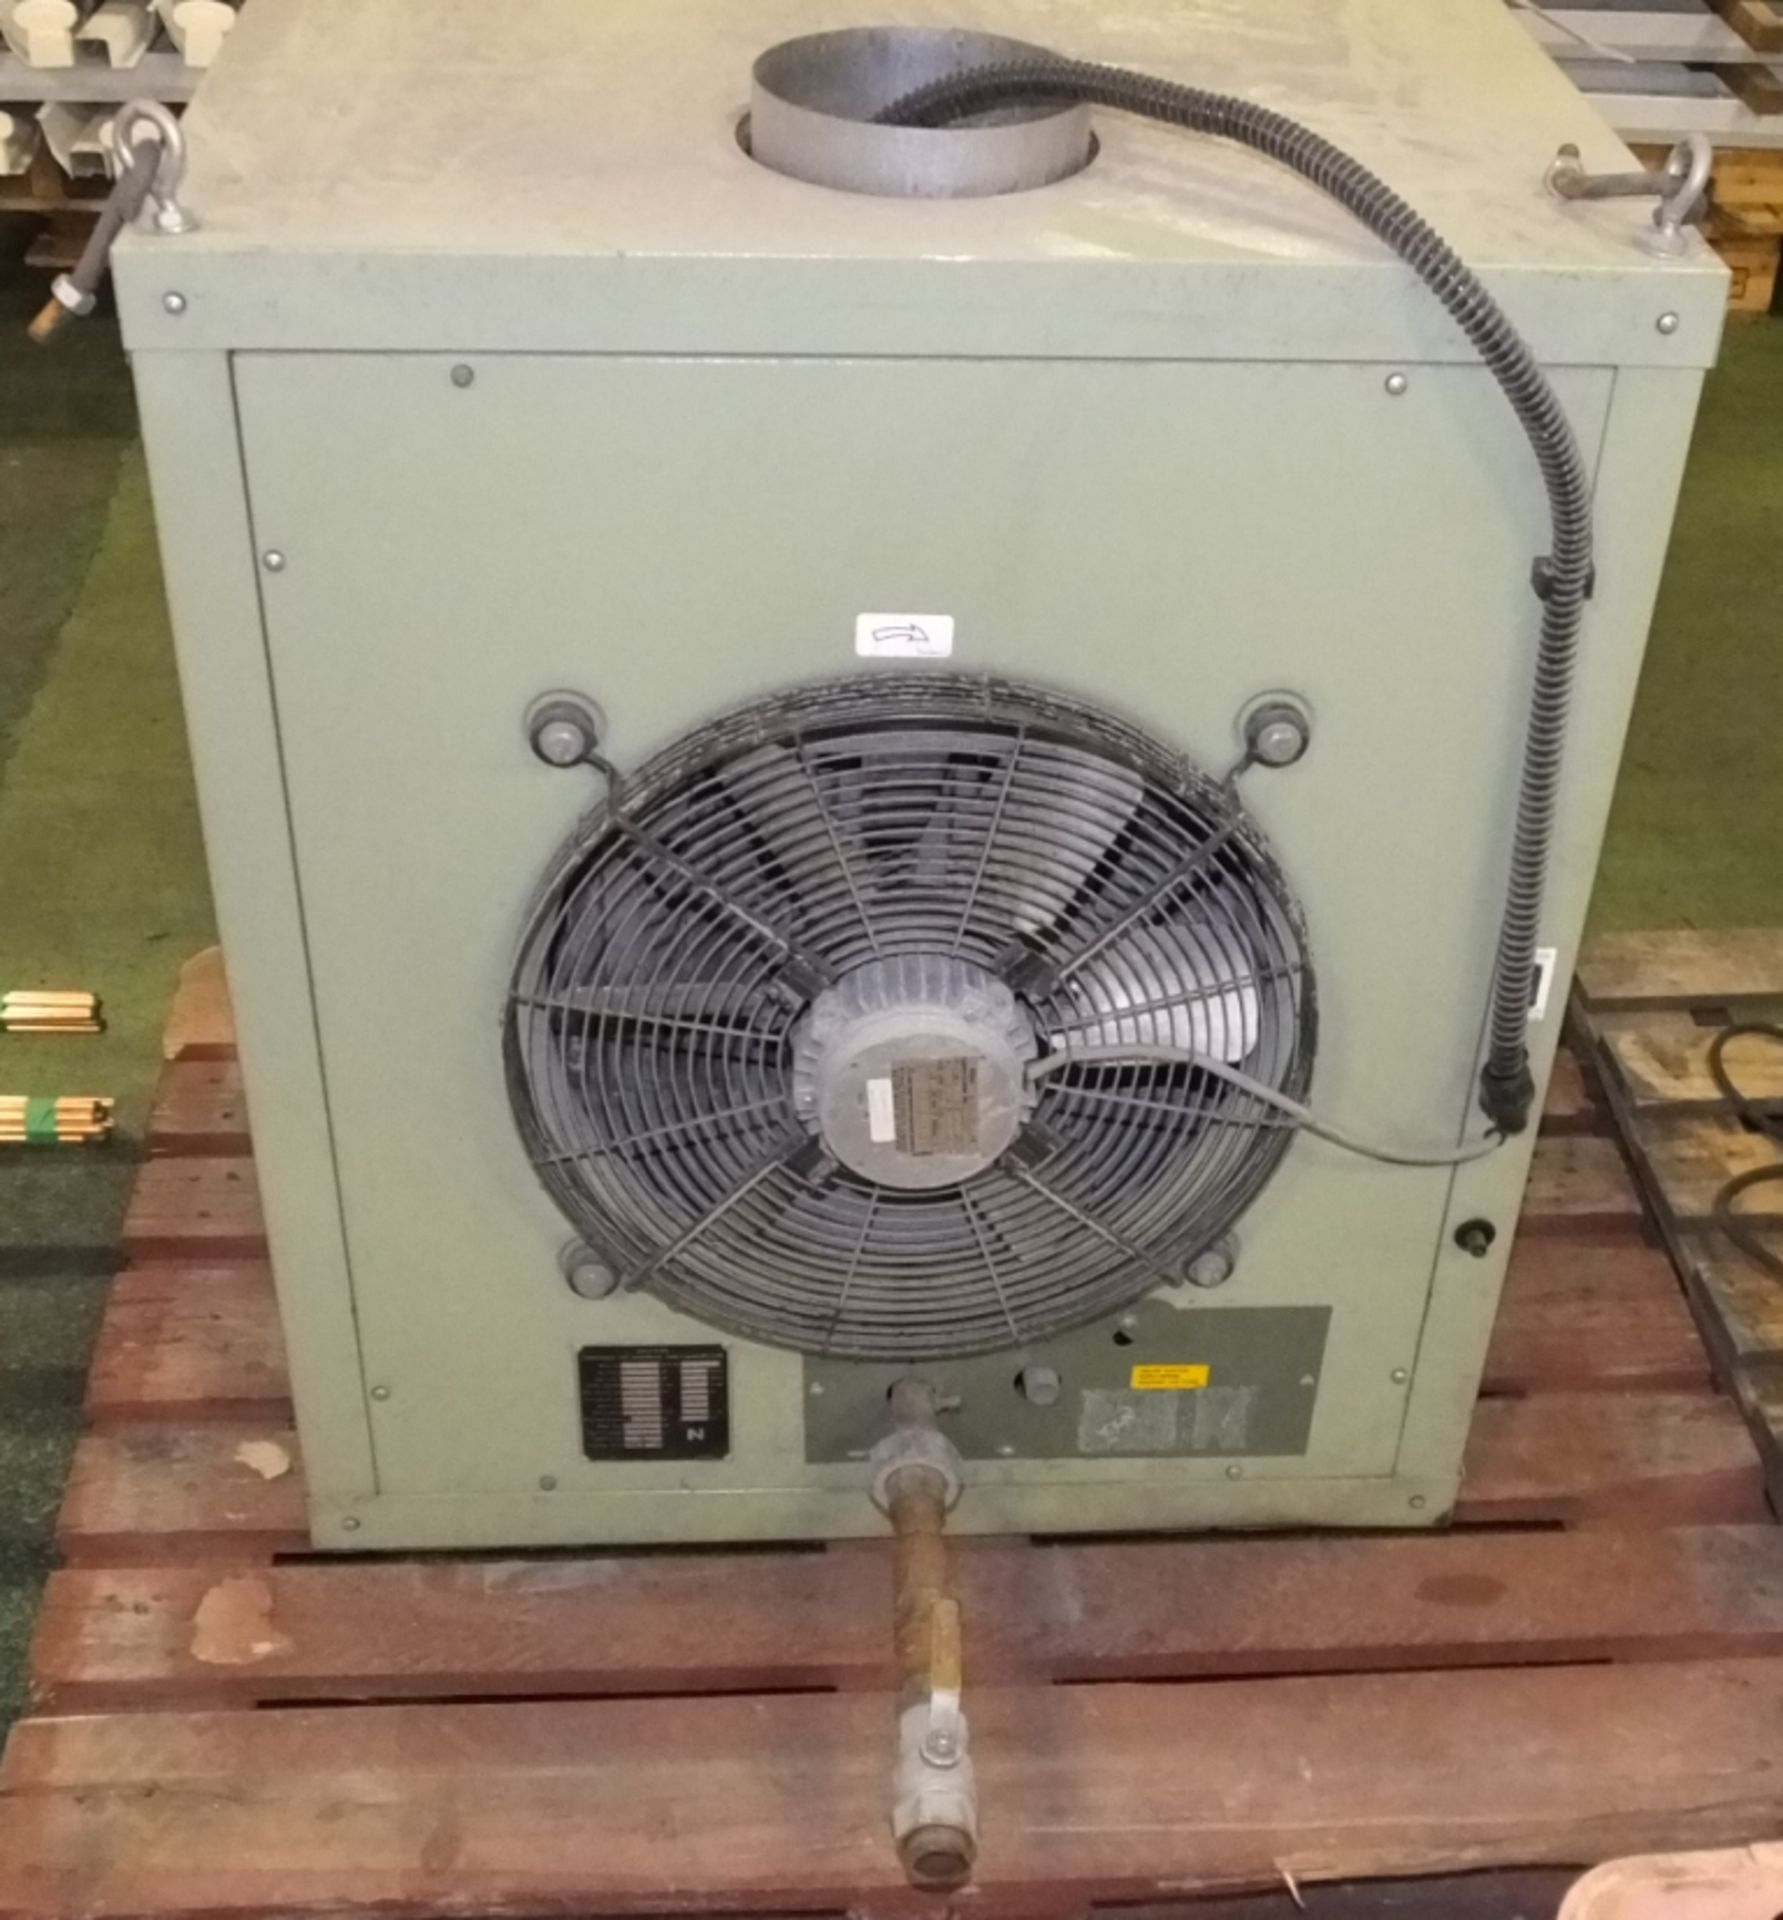 Powrmatic Industrial Gas Heater unit - 29kW - Image 5 of 6